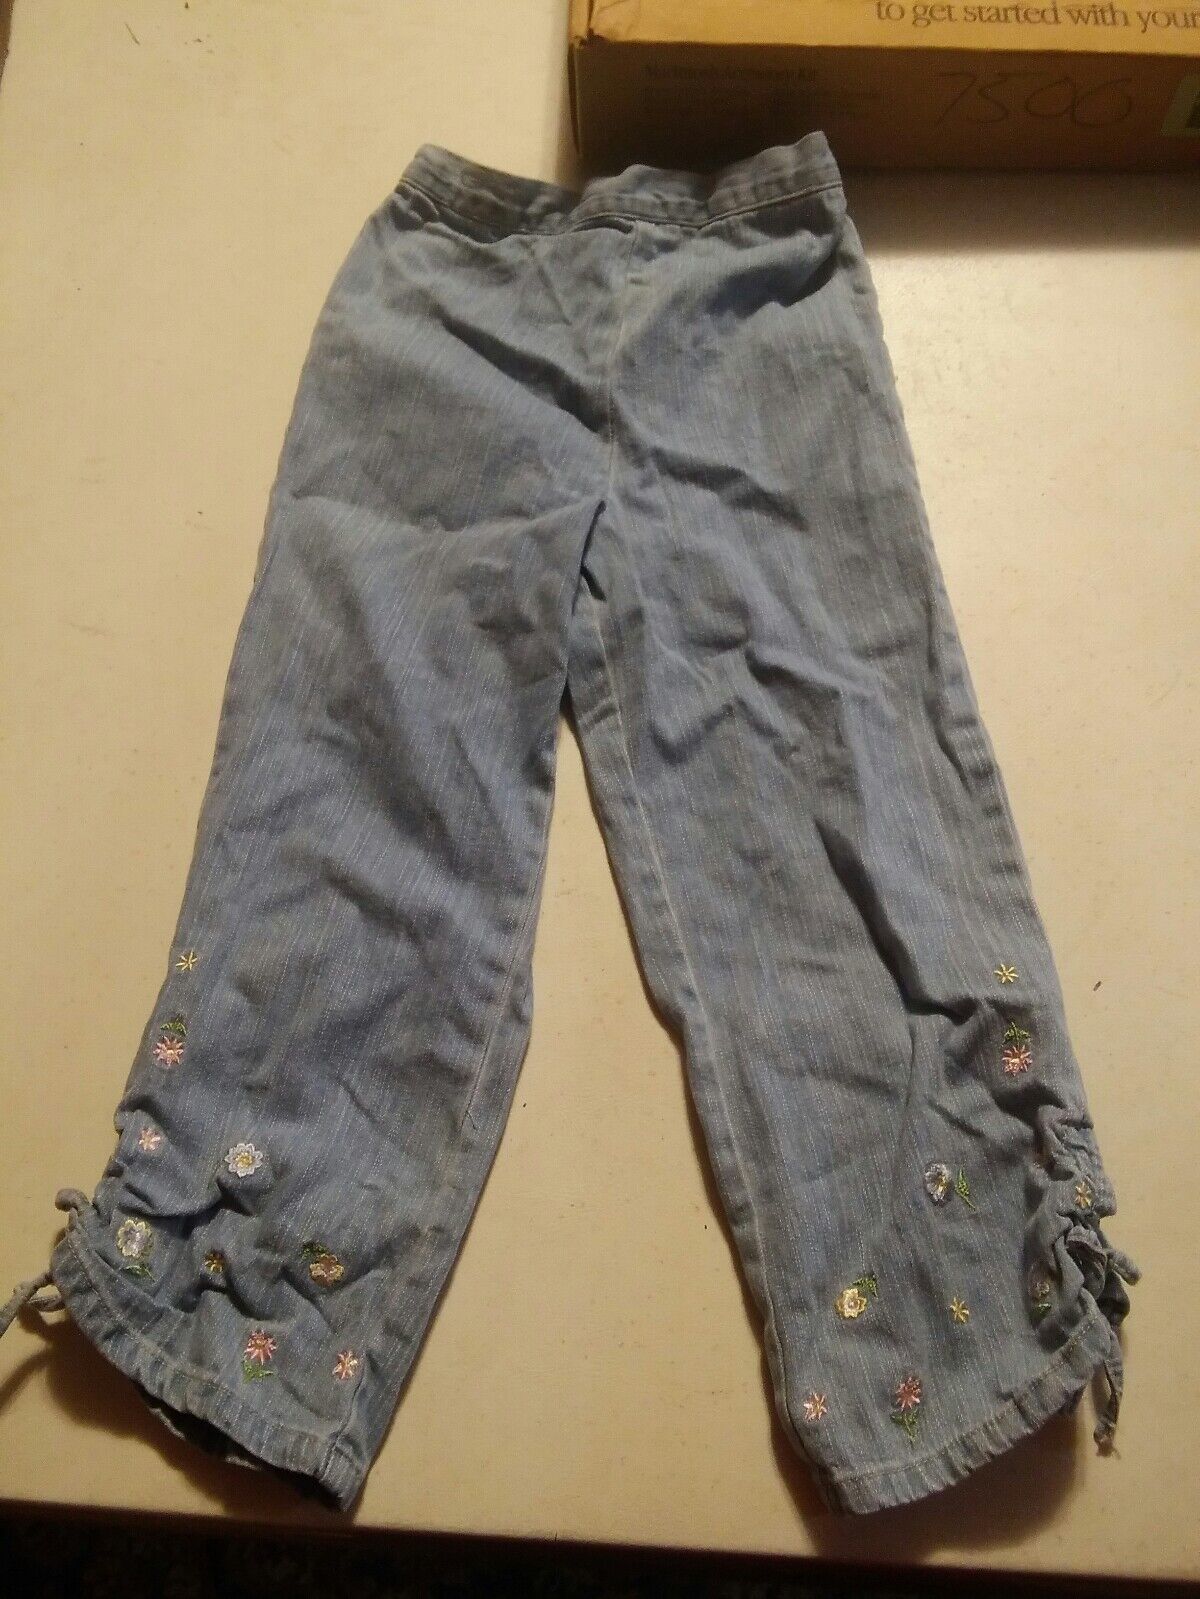 000 Cute Girls Kids Headquartes Size 6 Tie At Ankle Jeans Flowers - $2.99